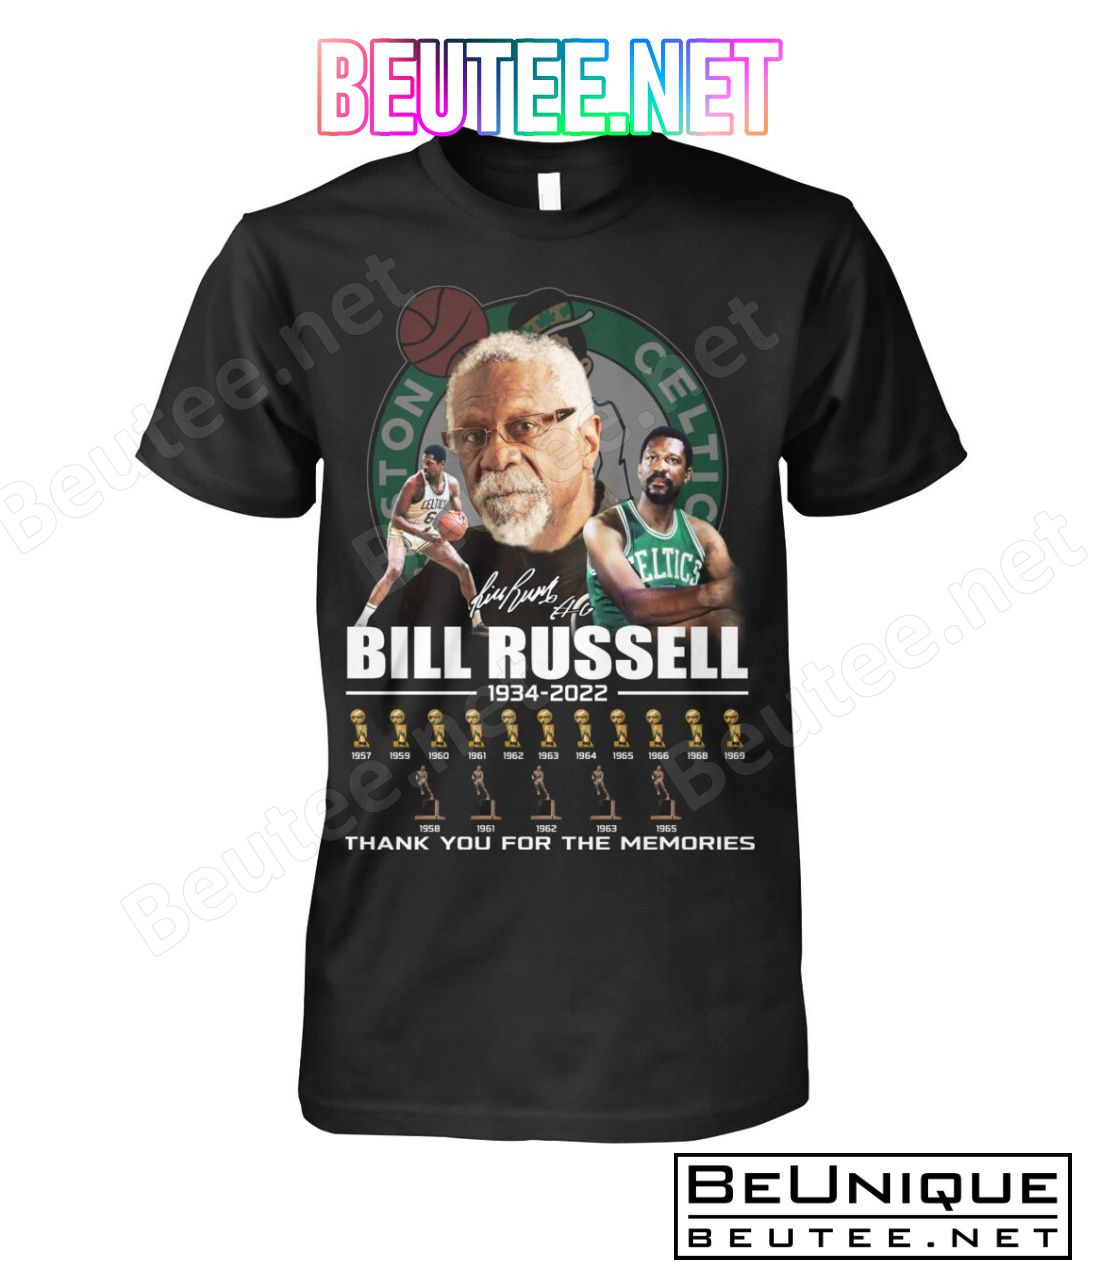 Bill Russell 1934-2022 Champion Cups Thank You For The Memories Signature Shirt